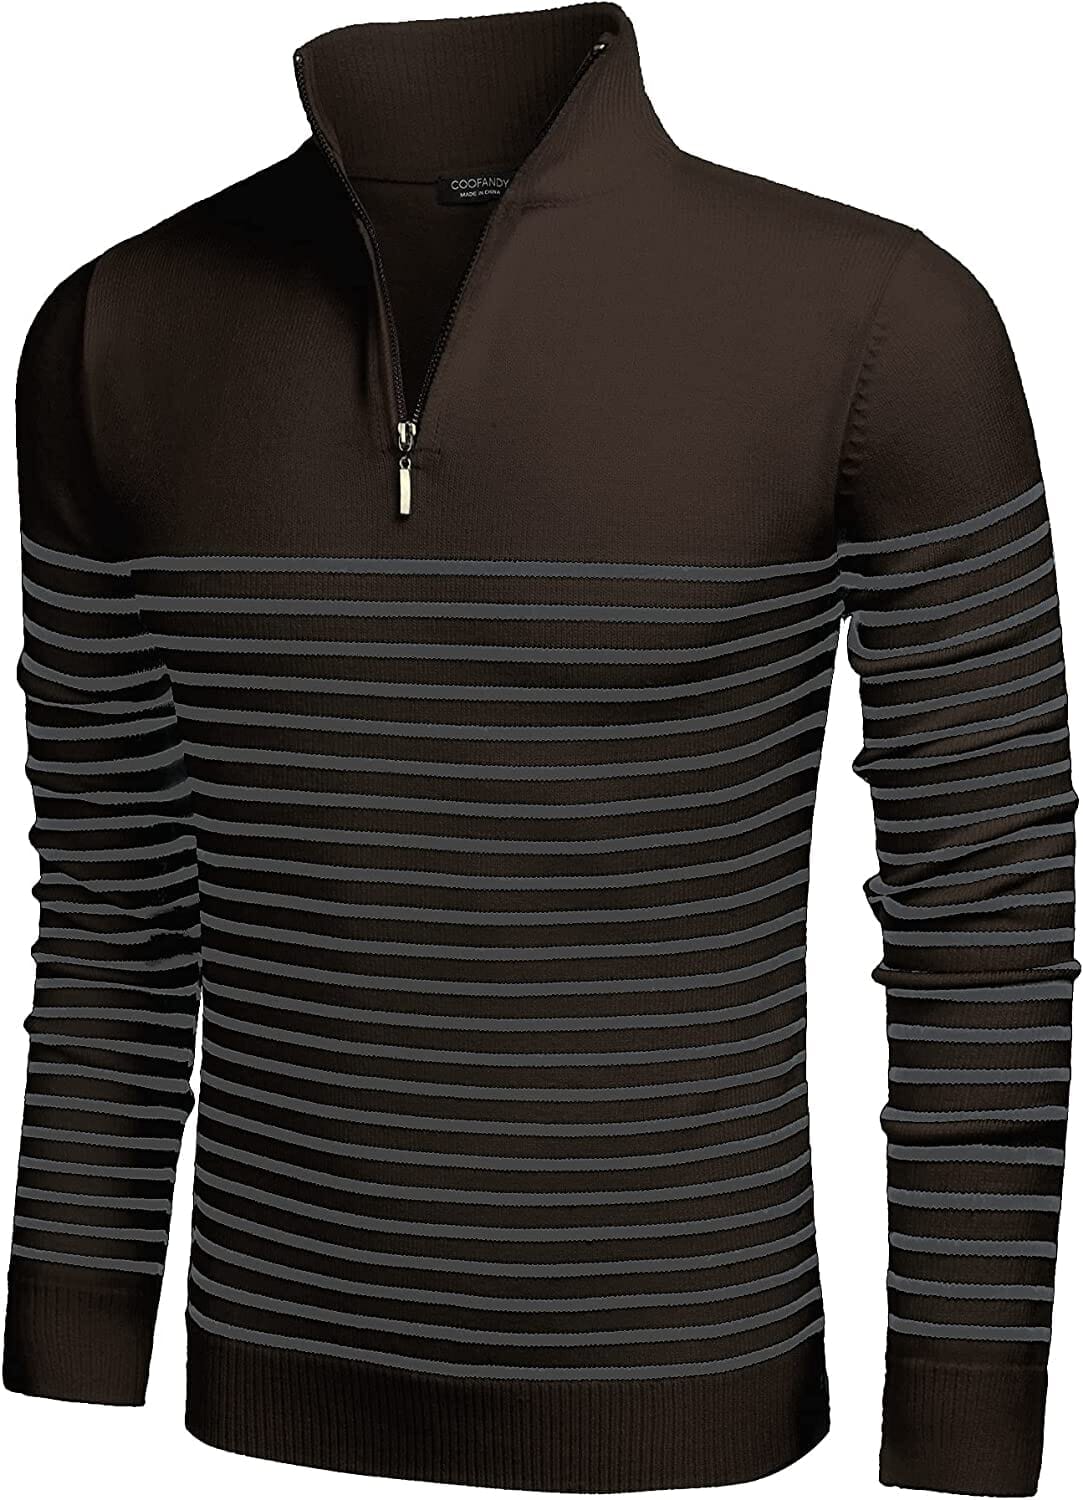 Coofandy Striped Zip Up Mock Neck Pullover Sweaters (US Only) Fashion Hoodies & Sweatshirts Simbama Brown S 